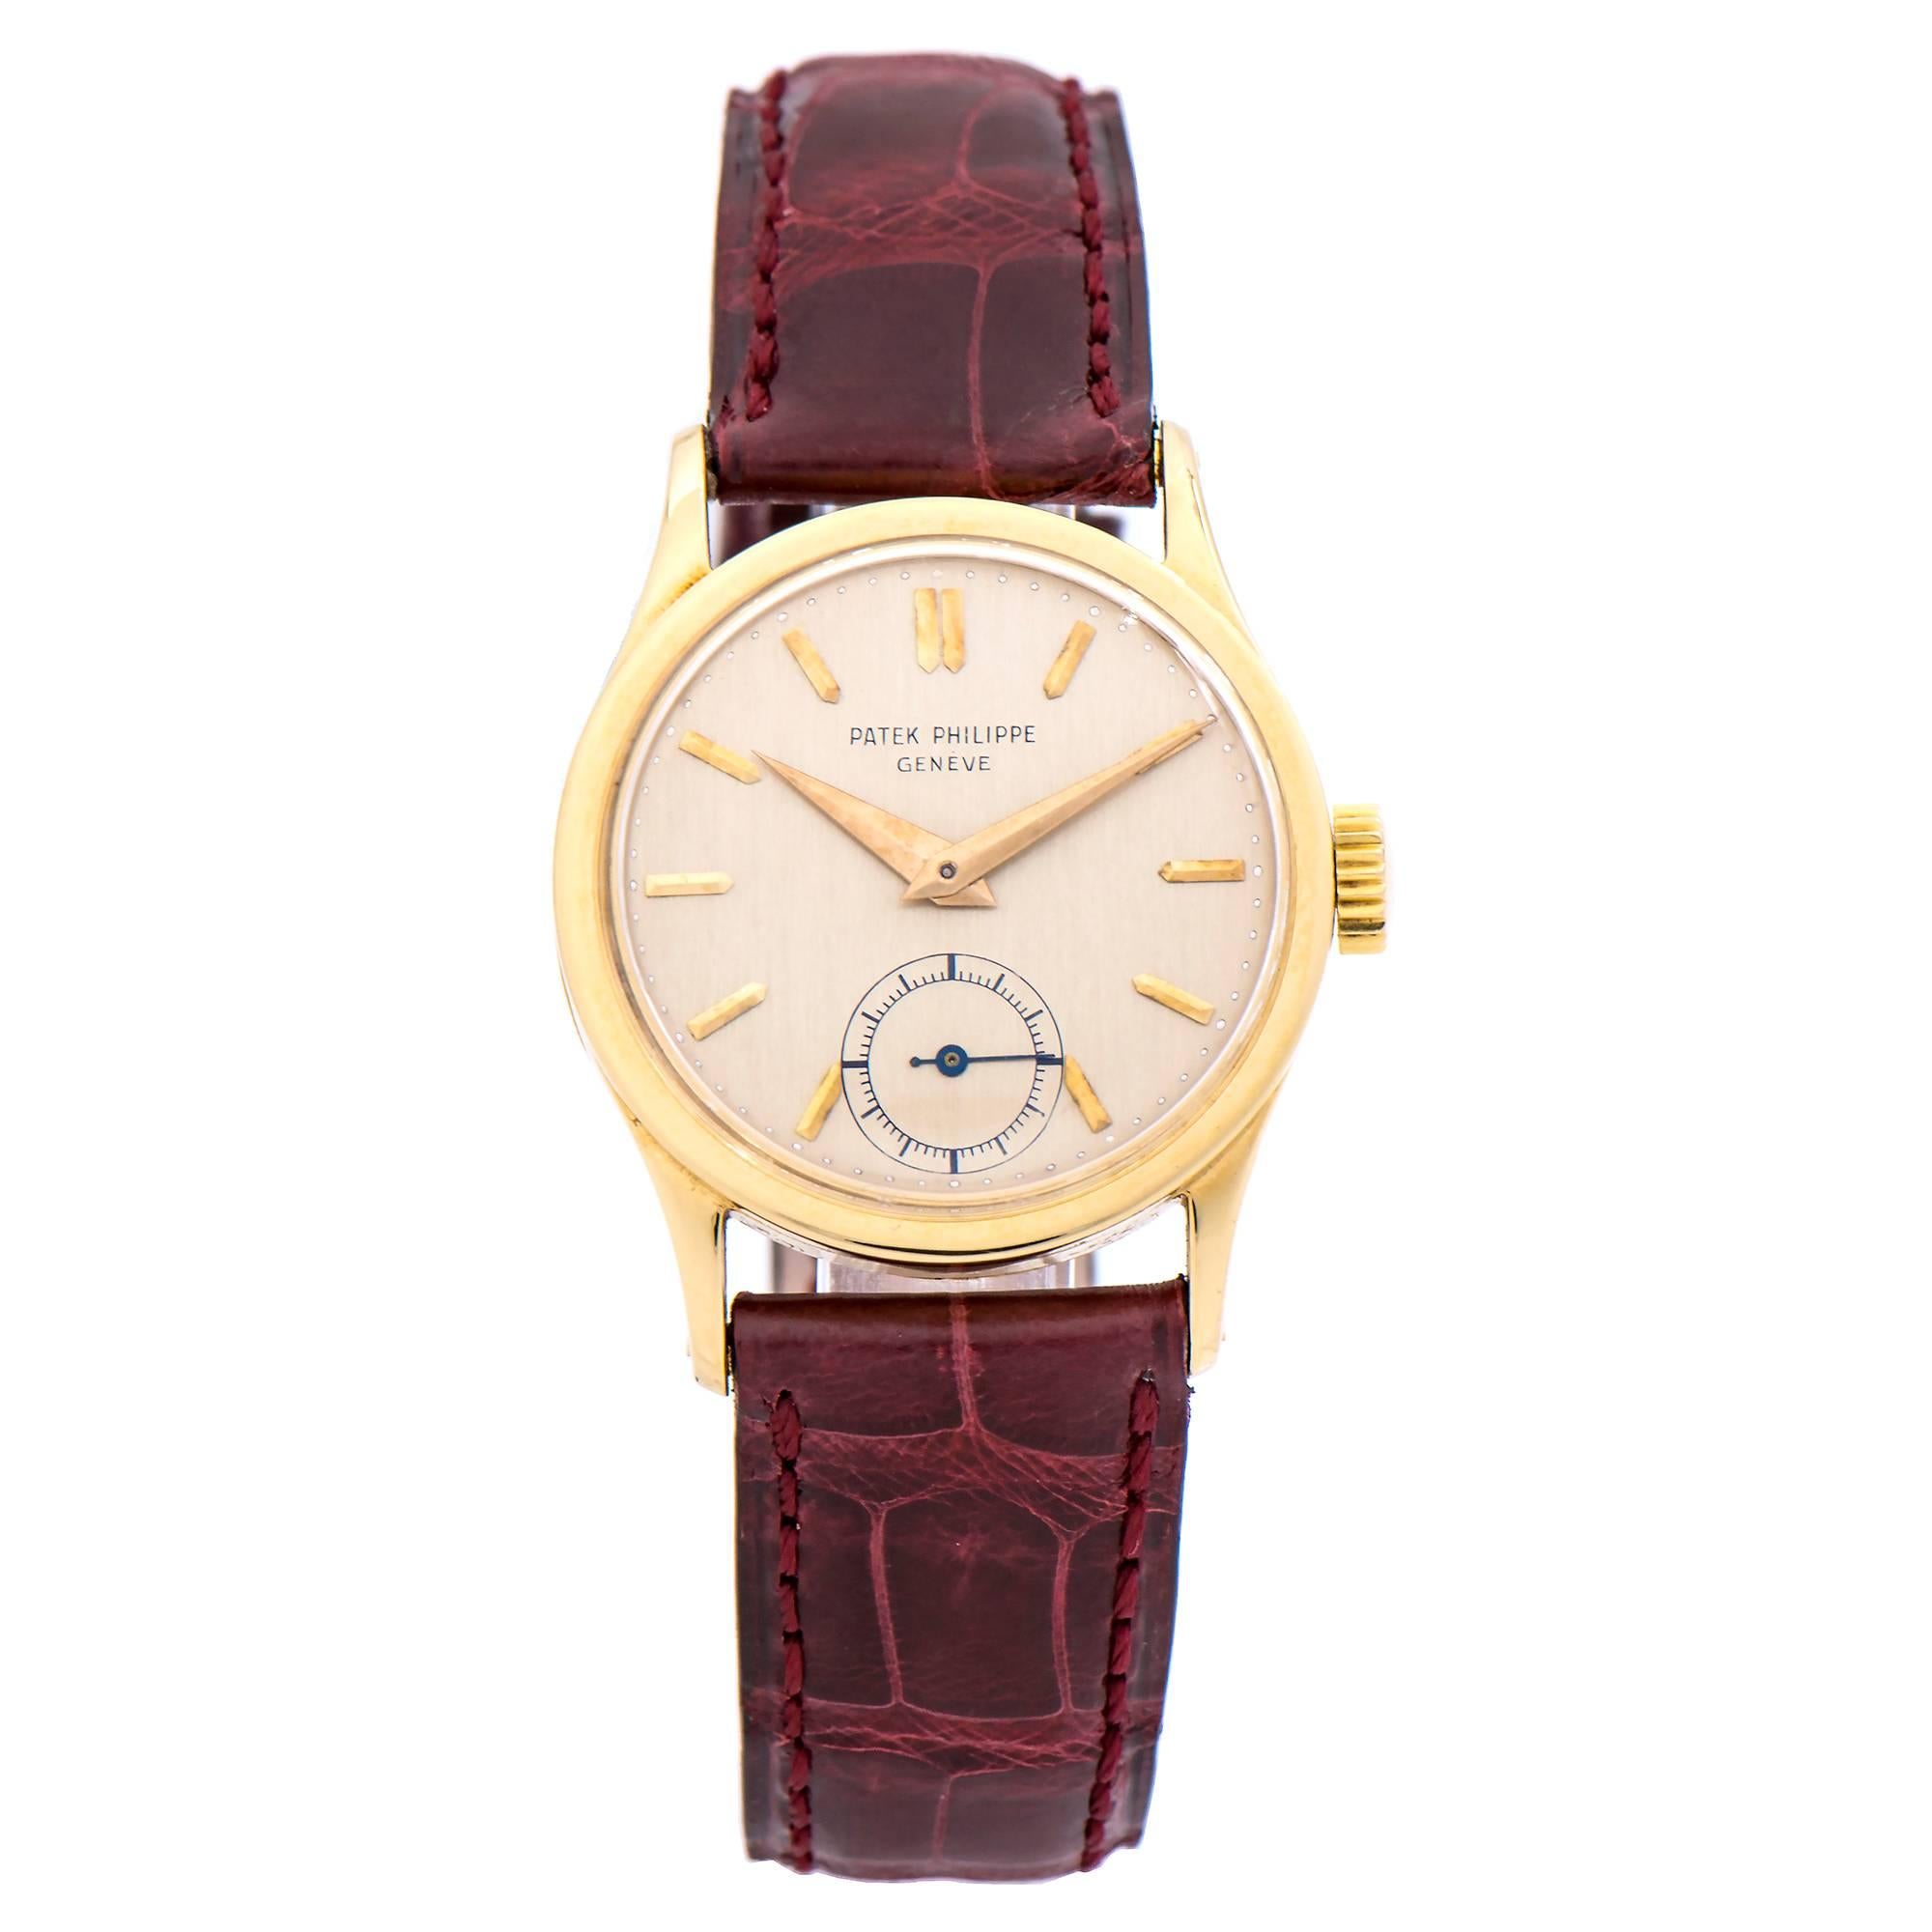 Patek Philippe Calatrava 18k Yellow Gold wristwatch with original dial and hands with laped yellow gold indexes and subsidiary seconds dial at 6 o'clock. Domed acrylic crystal. New unworn Patek Philippe band and 18k yellow gold buckle. 

Calibre